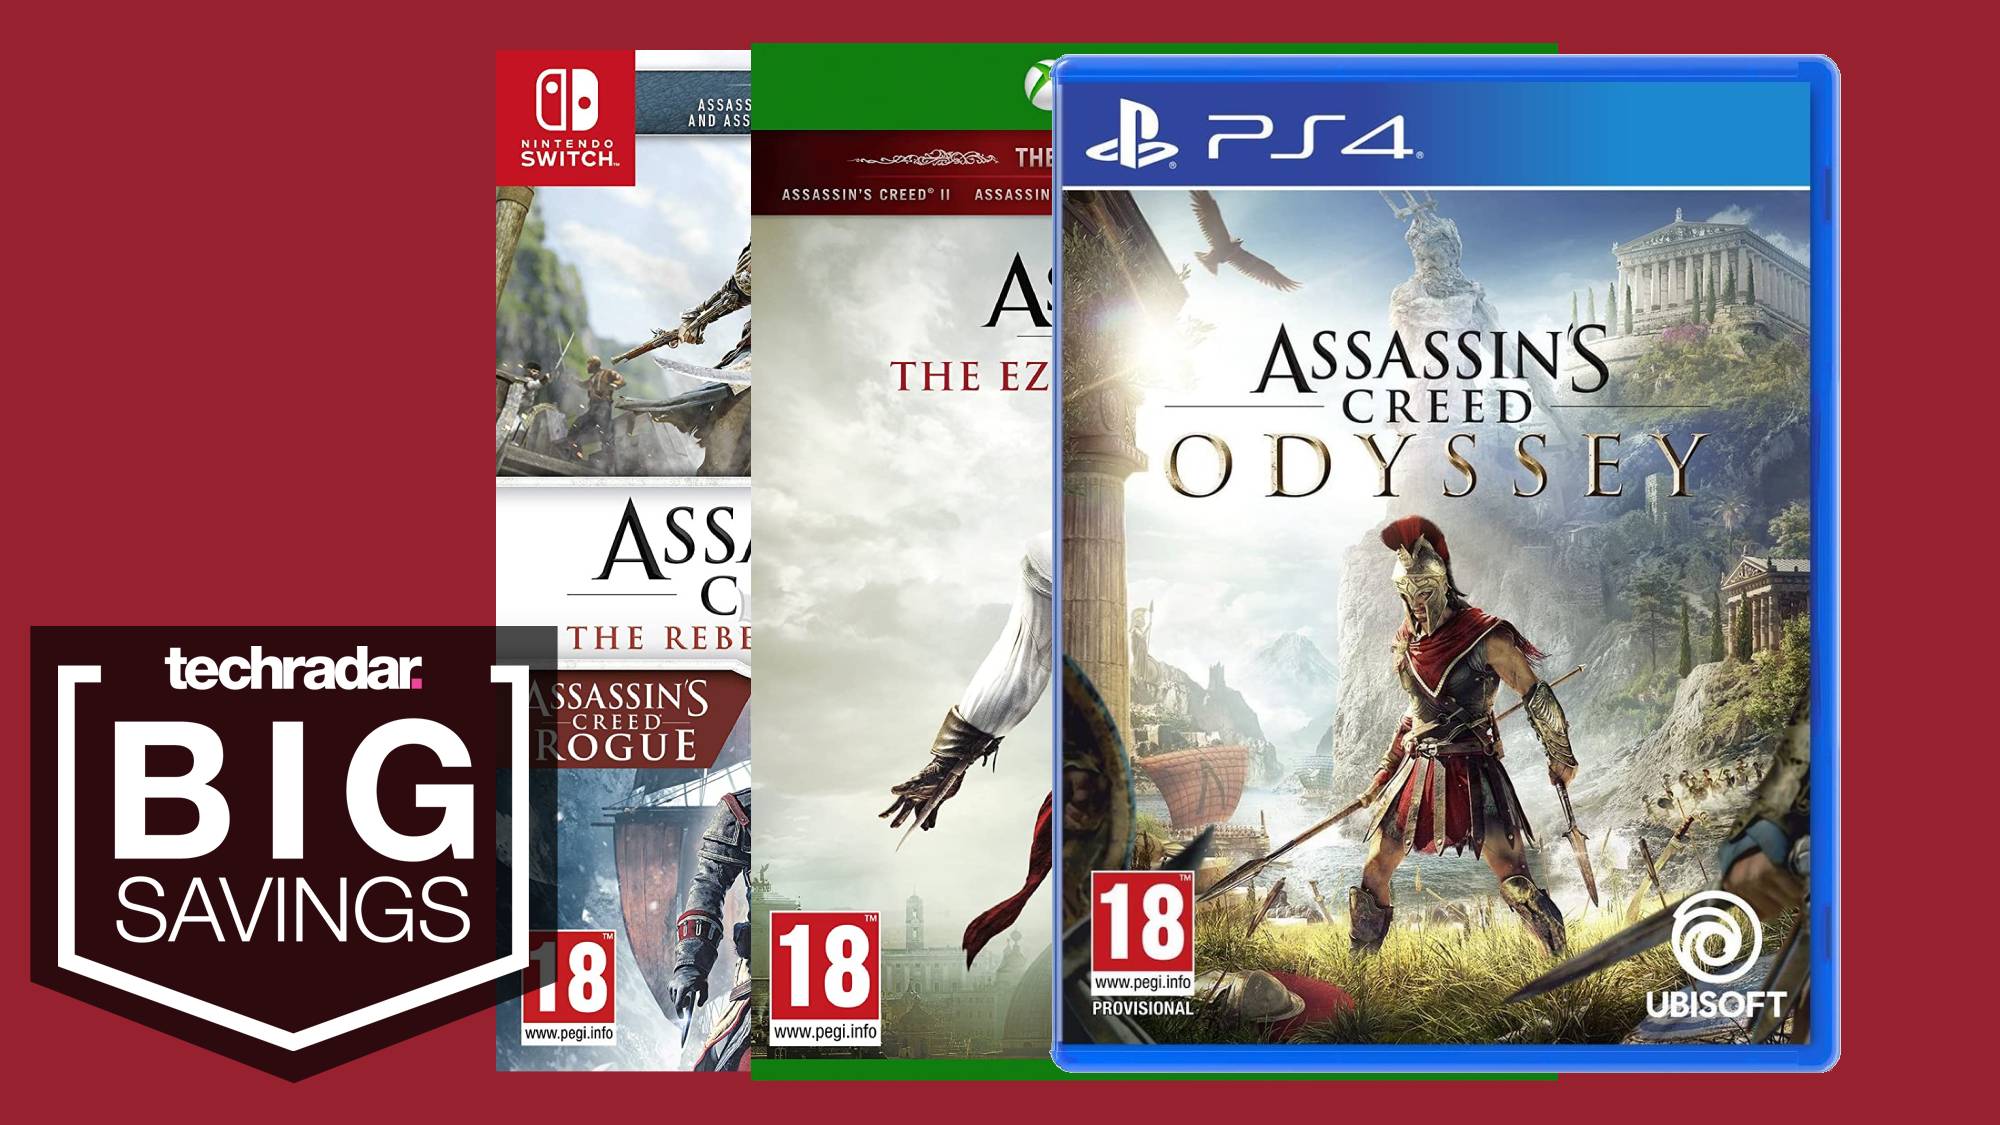 Three Assassin's Creed Boxarts in addition to a price cut badge